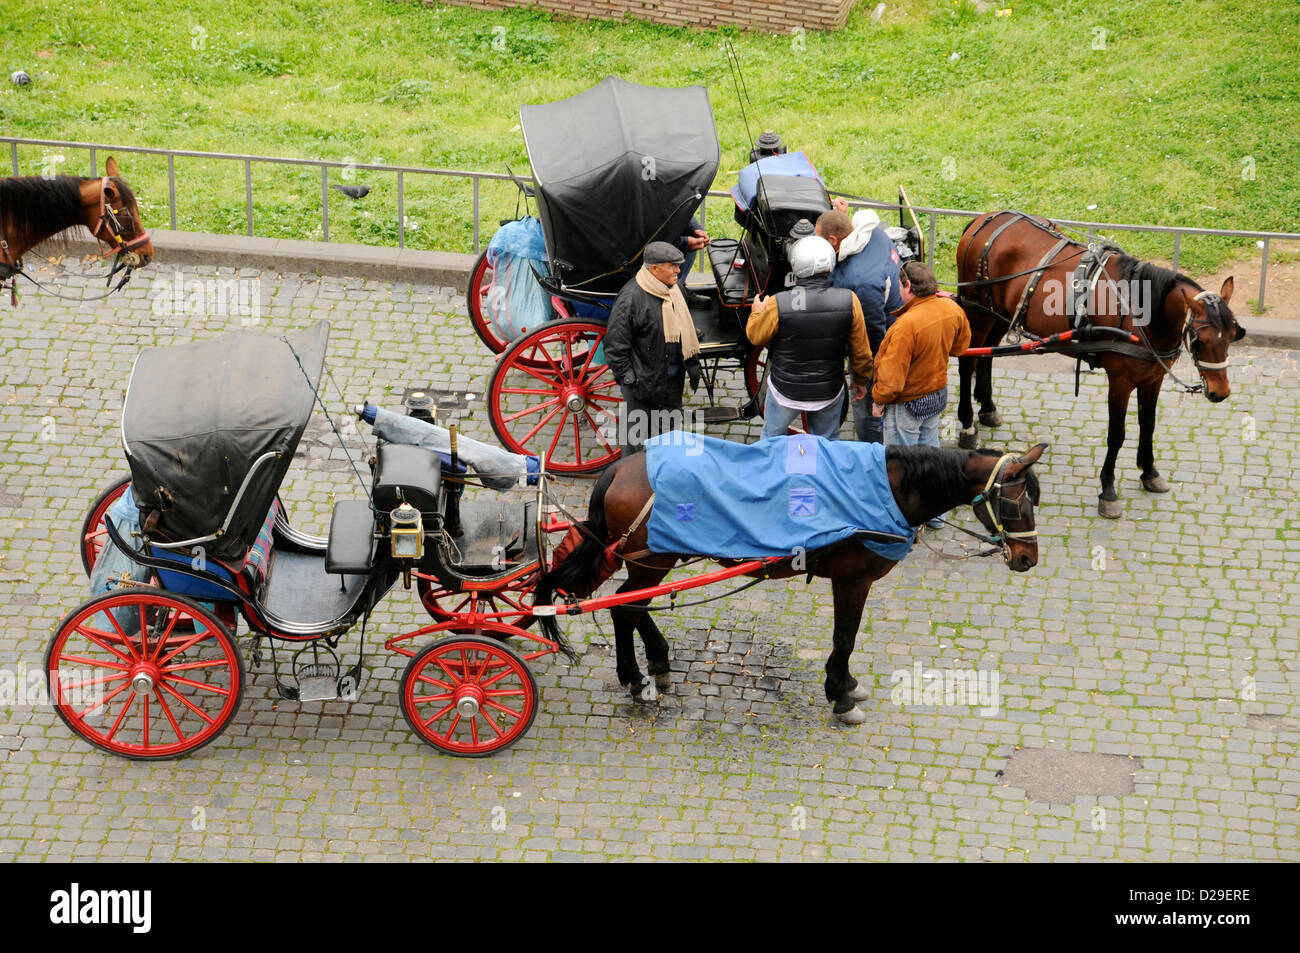 Horse-Drawn Carriages. Rome, Italy. Stock Photo